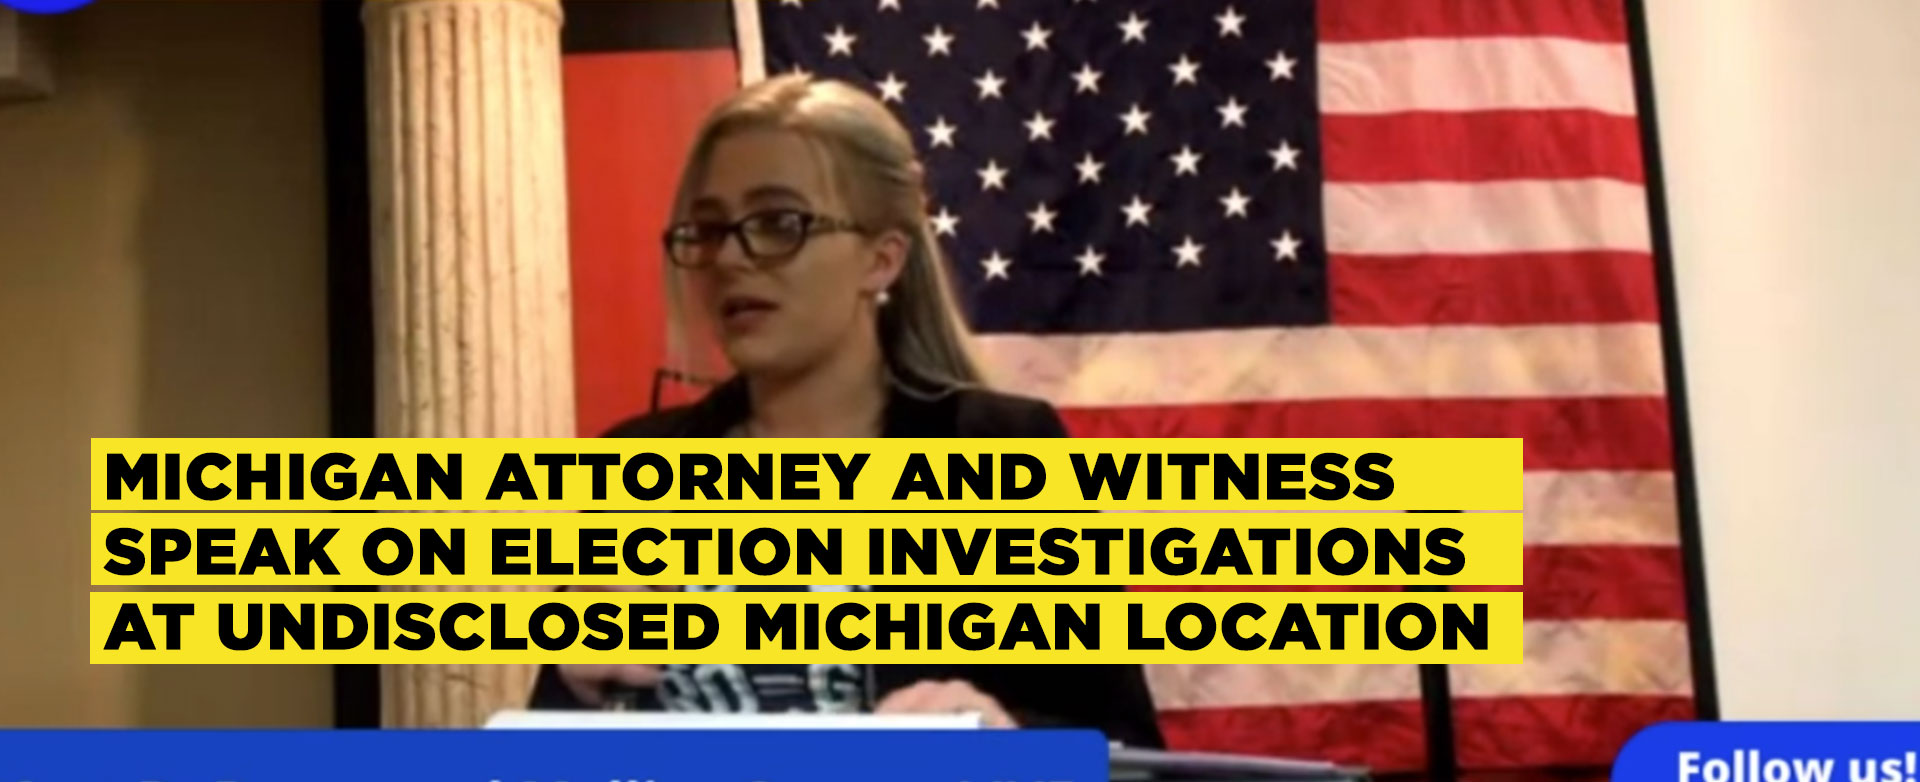 MyPatriotsNetwork-Michigan Attorney and Witness Speak on Election Investigations at Undisclosed Michigan Location